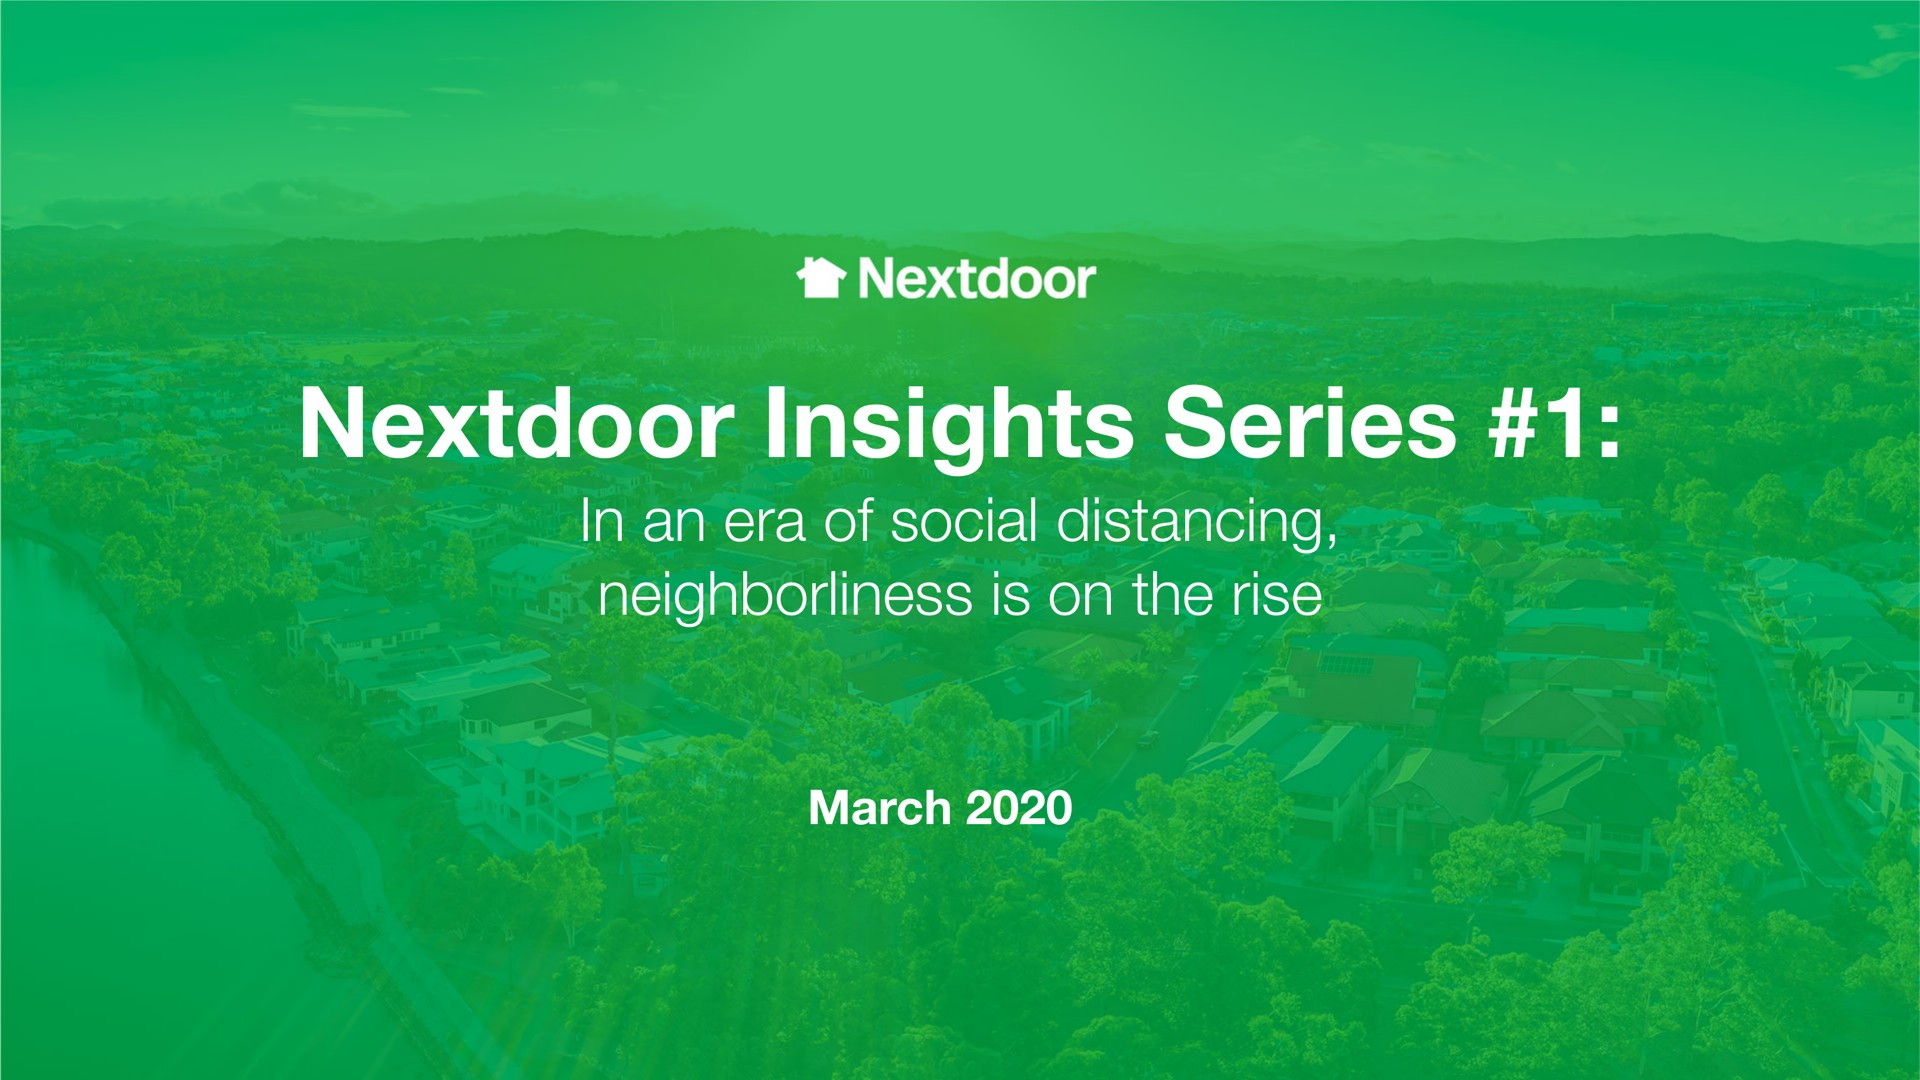 insights series in an era of social distancing neighborliness is on the rise | Nextdoor